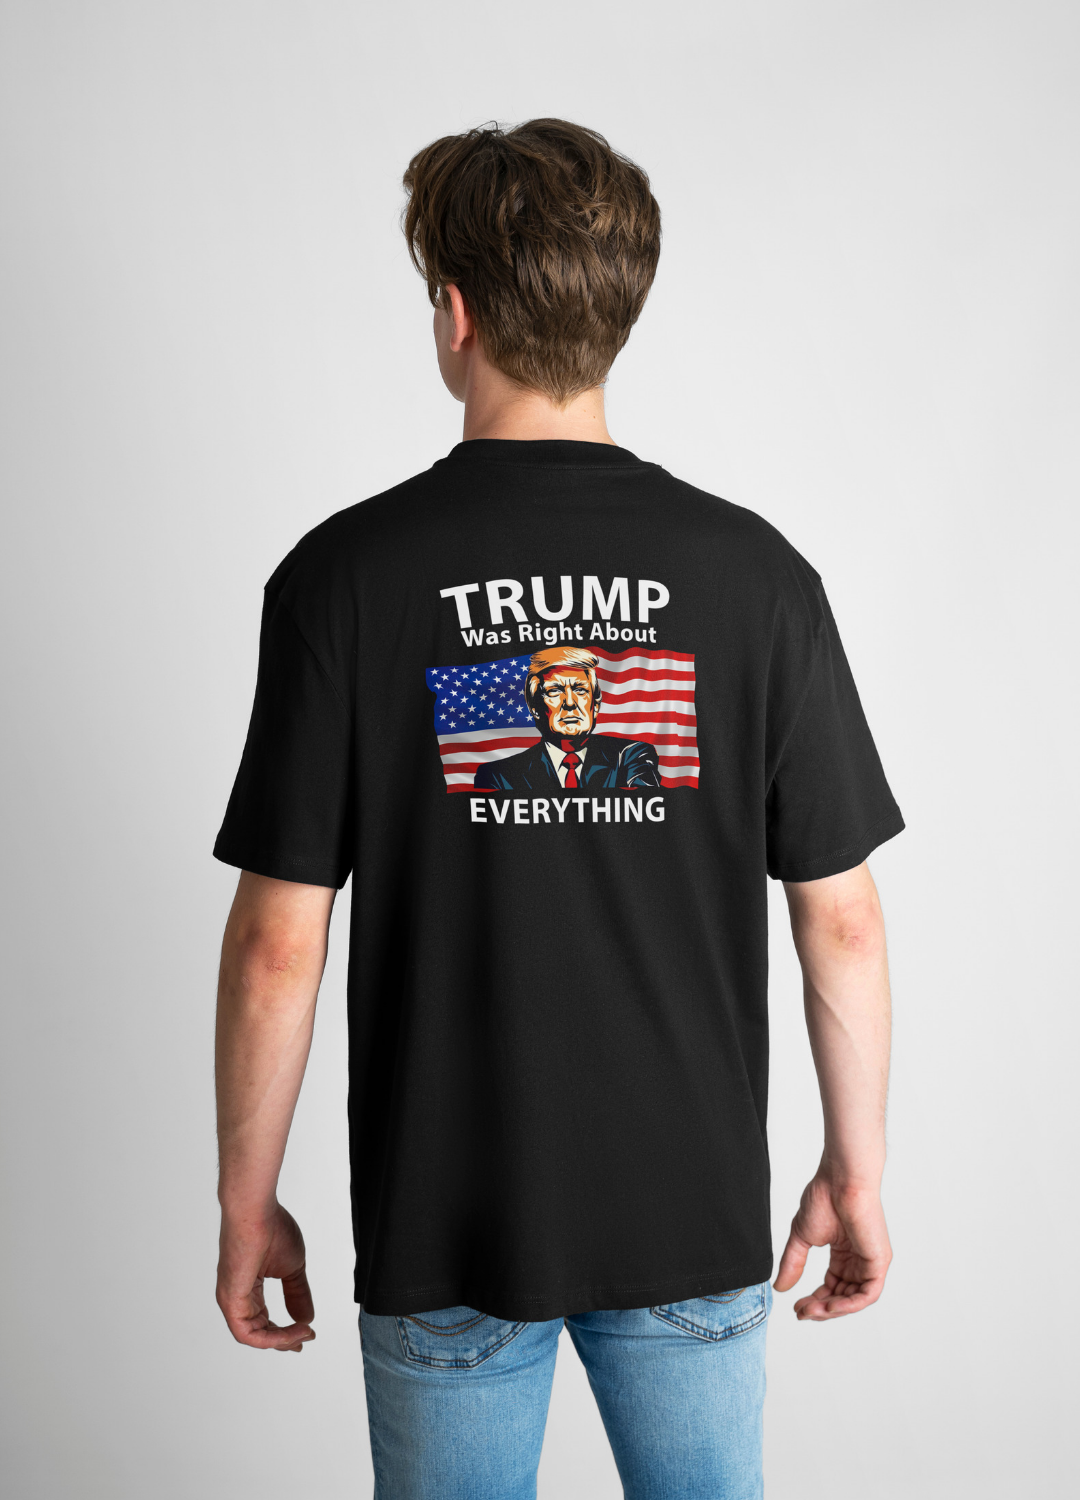 Buy the newest and most iconic Donald Trump T-Shirt | Support Donald Trump in the 2024 Elections